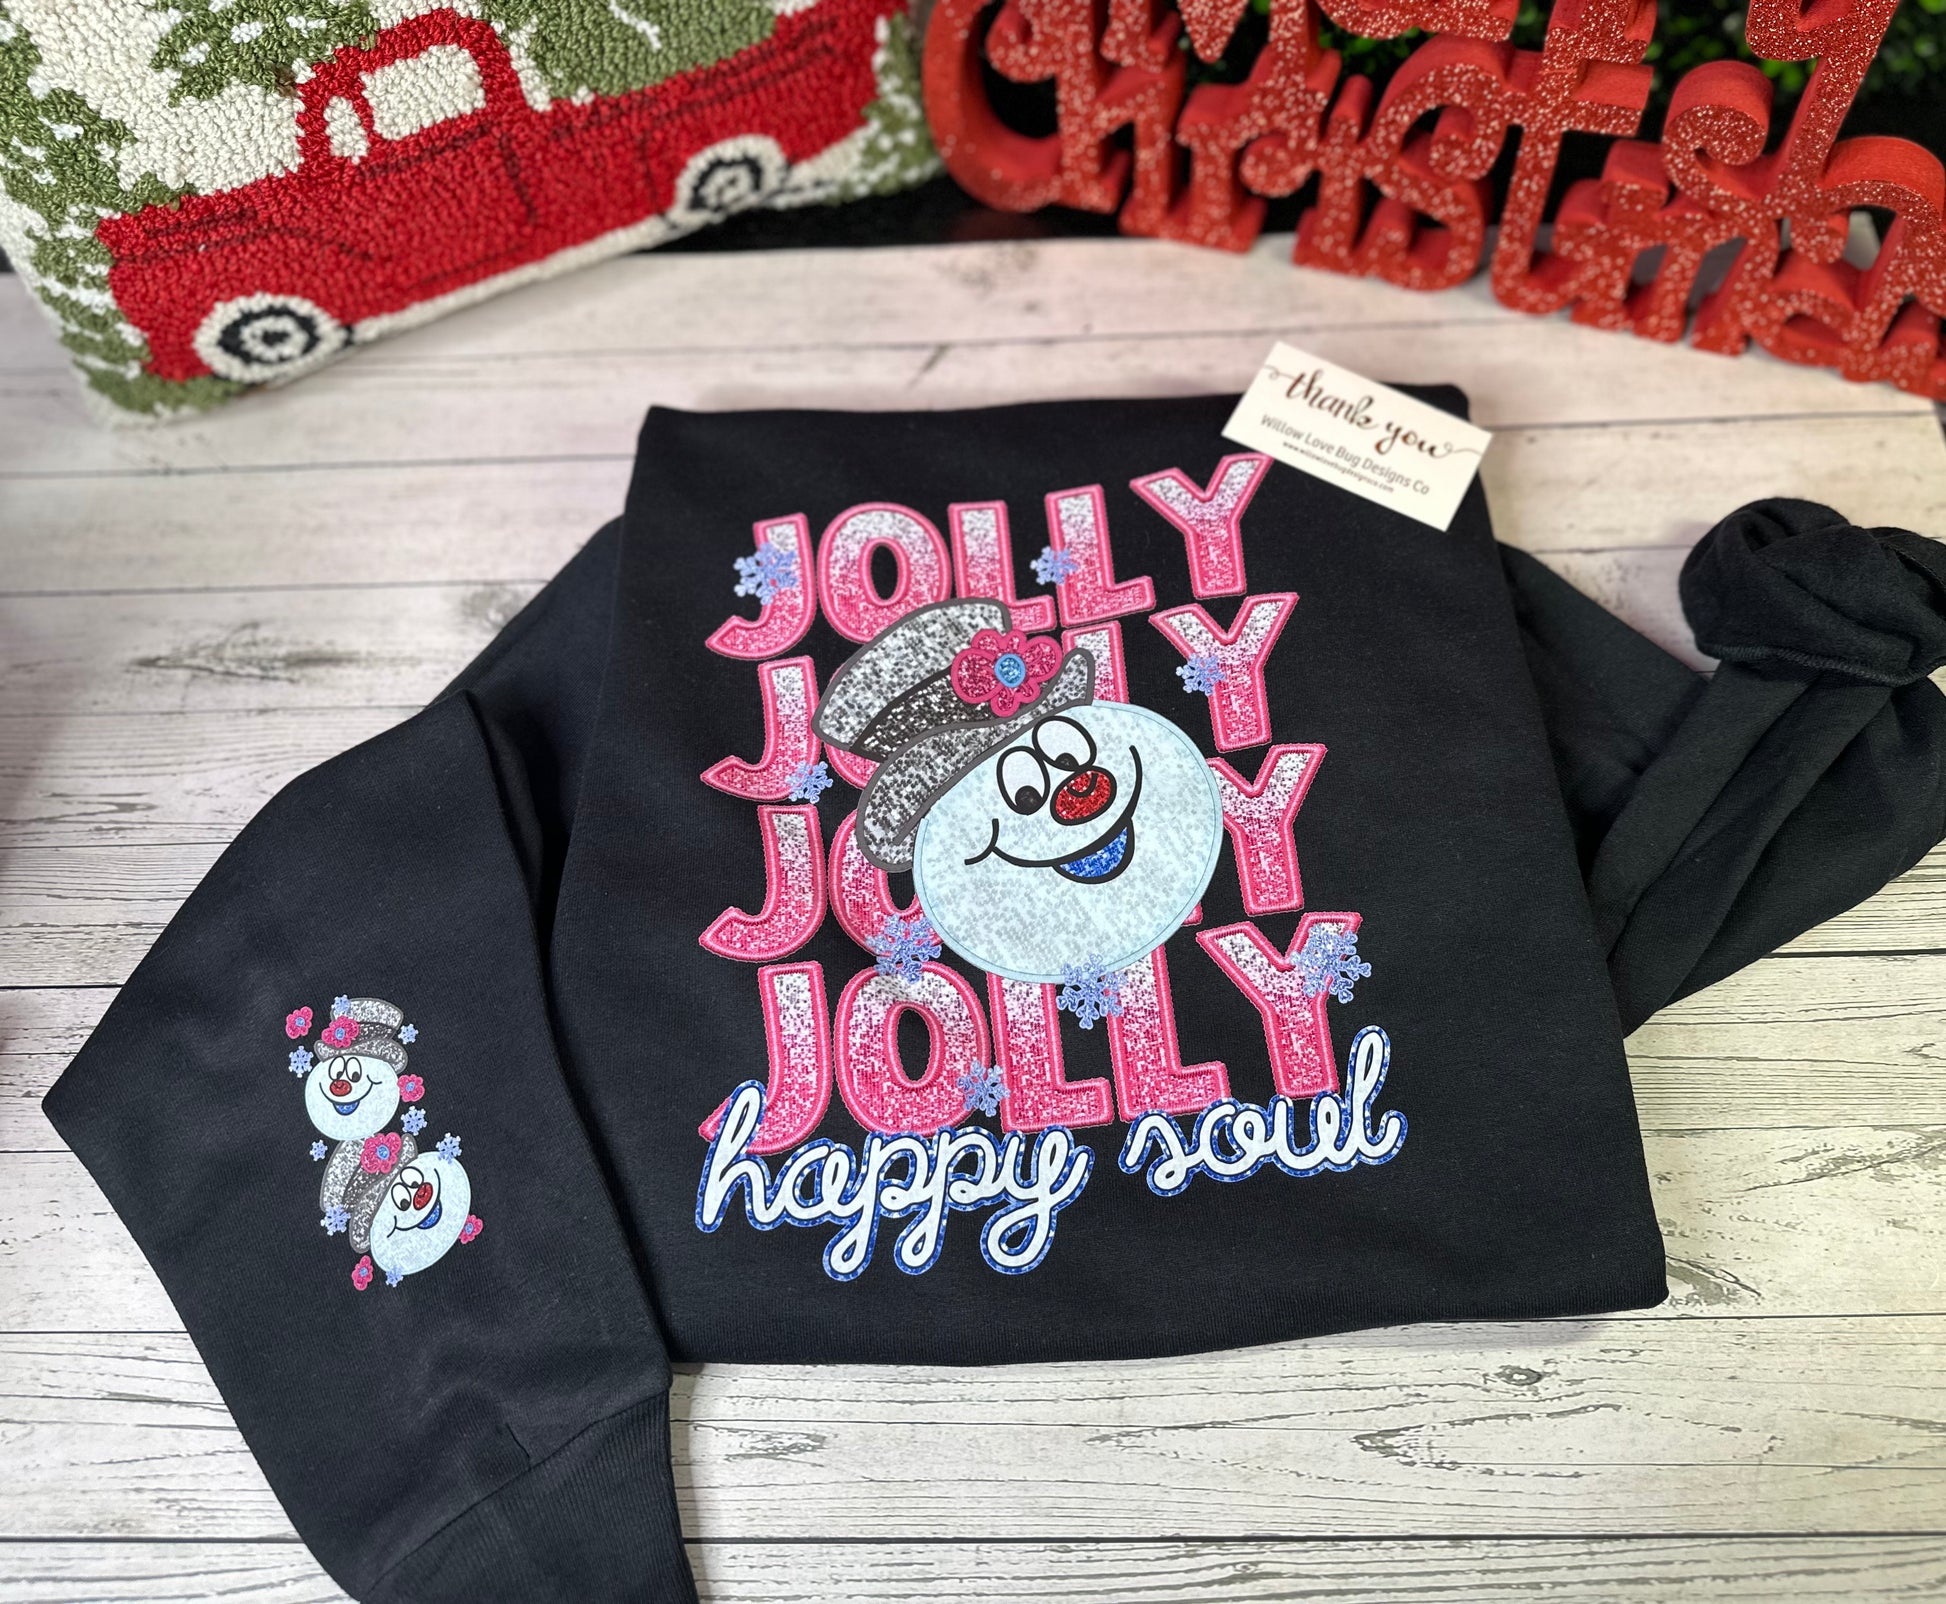 Jolly Frosty Happy Soul Crewneck - Willow Love Bug Designs 